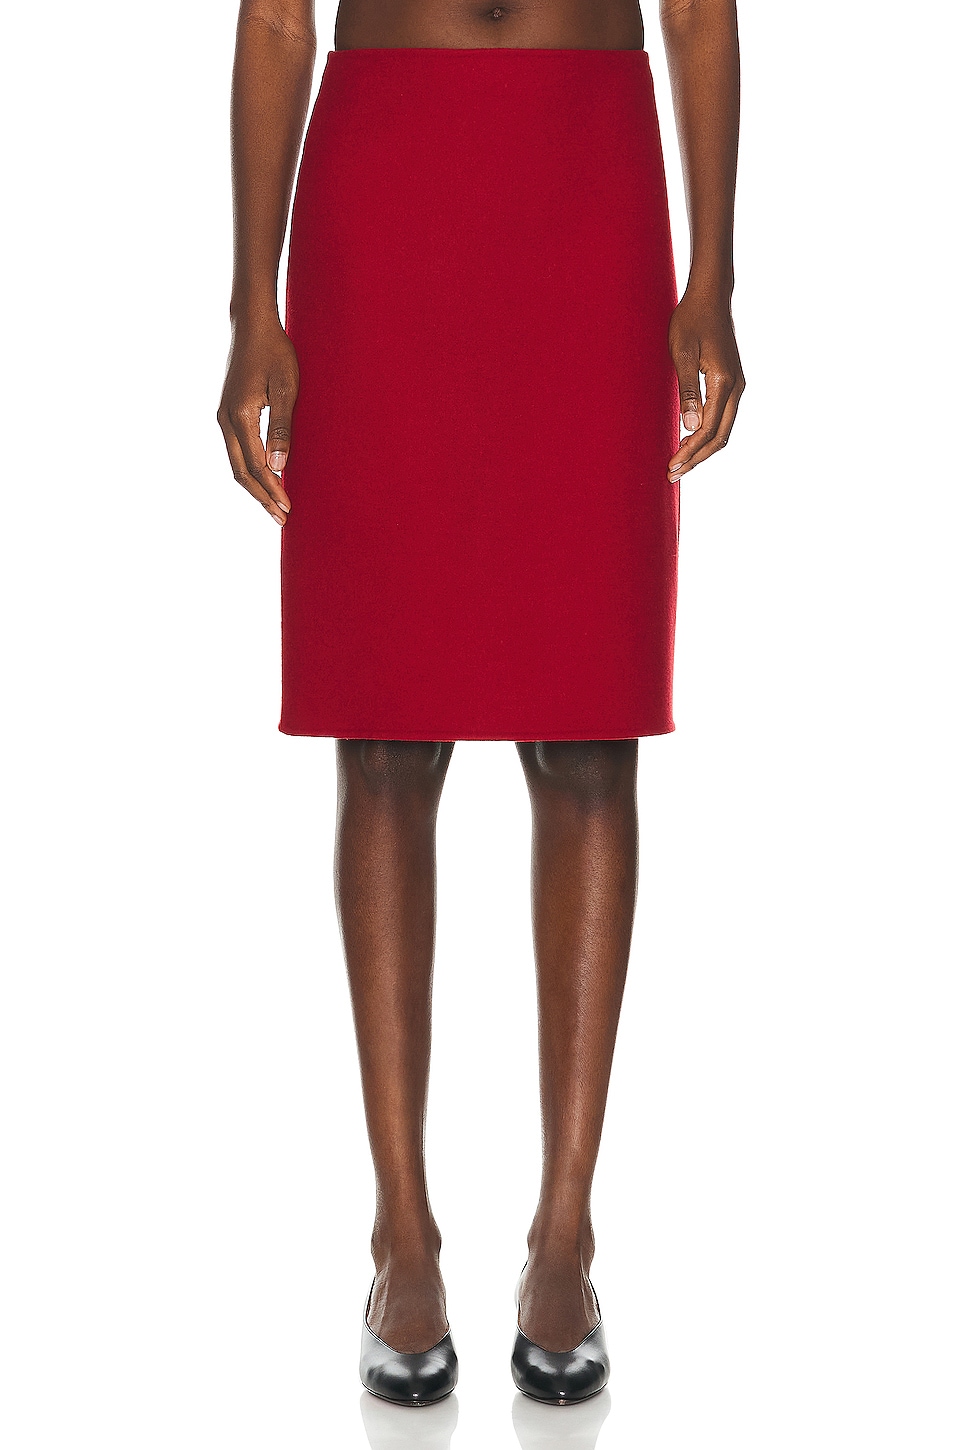 Image 1 of The Row Bart Skirt in Lipstick